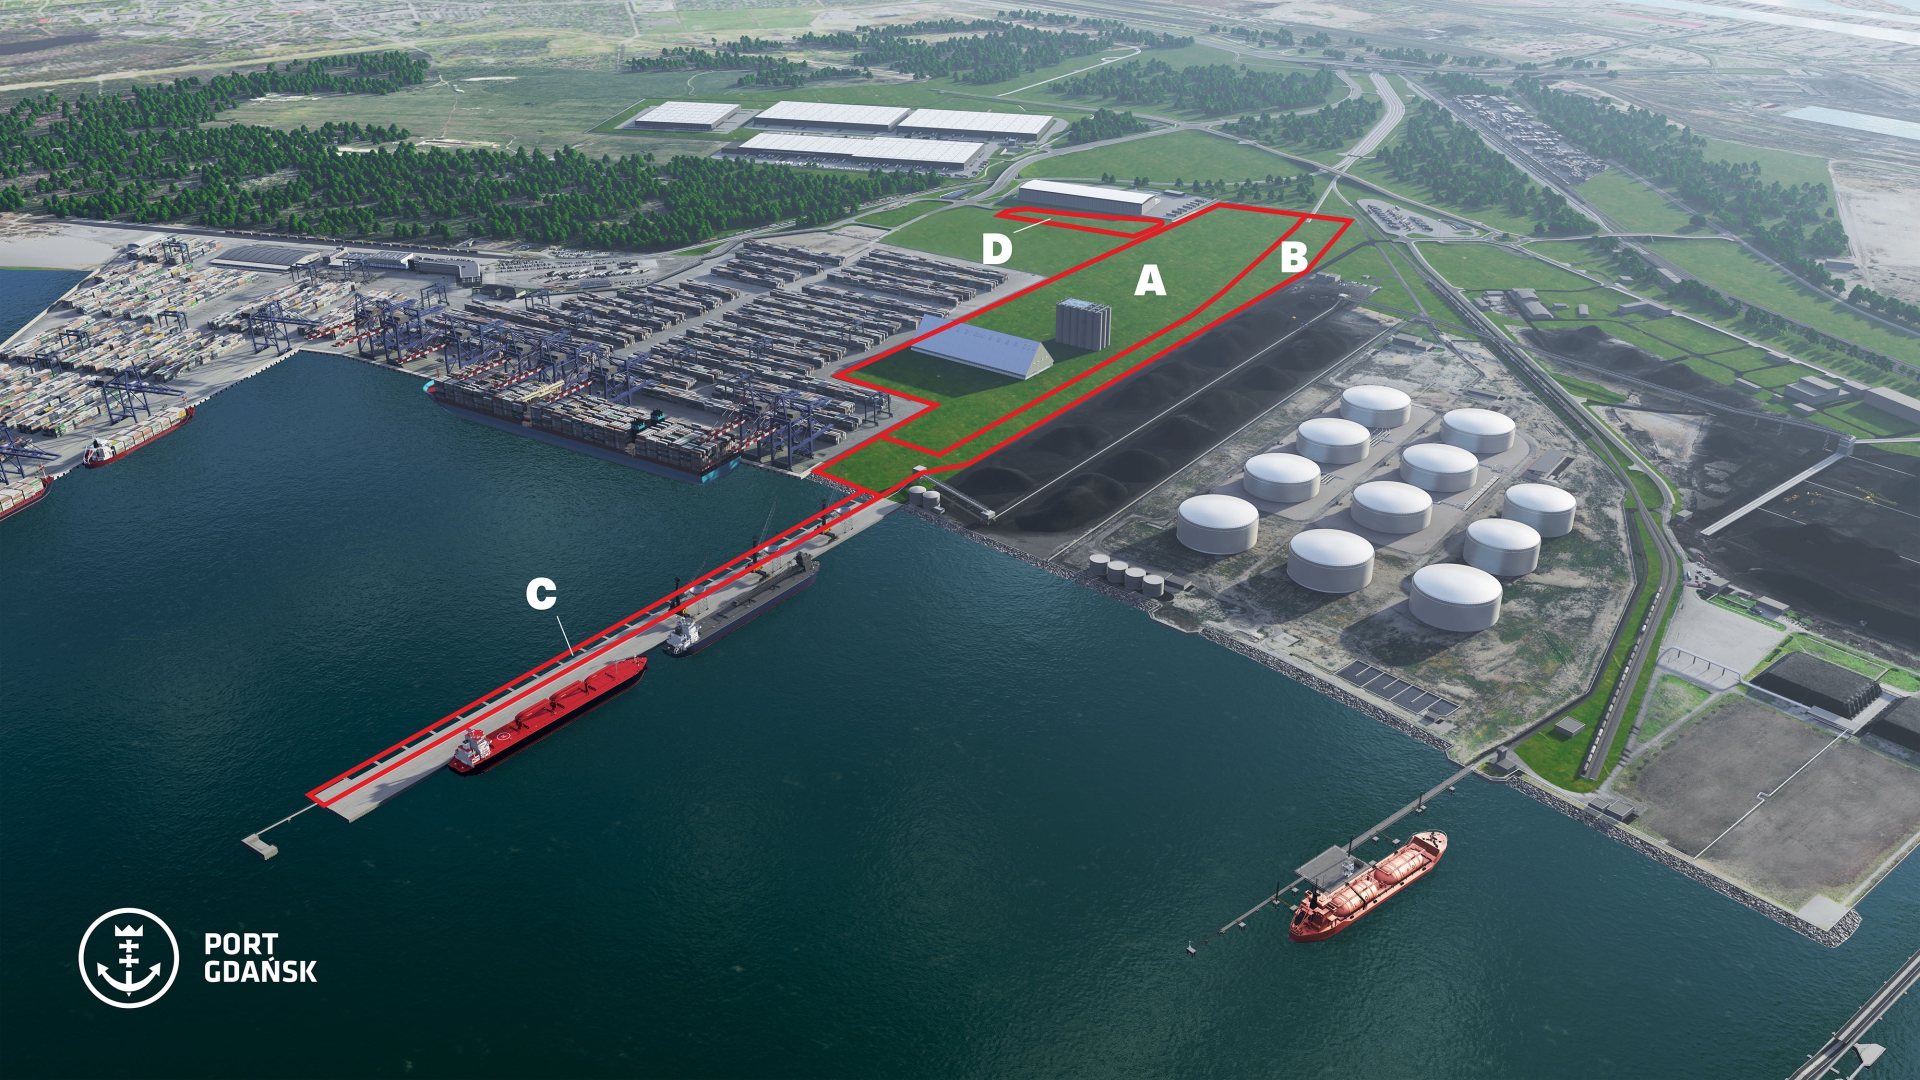 The Port of Gdansk has announced tender for investment areas at the Ore Pier in the Northern Port - MarinePoland.com